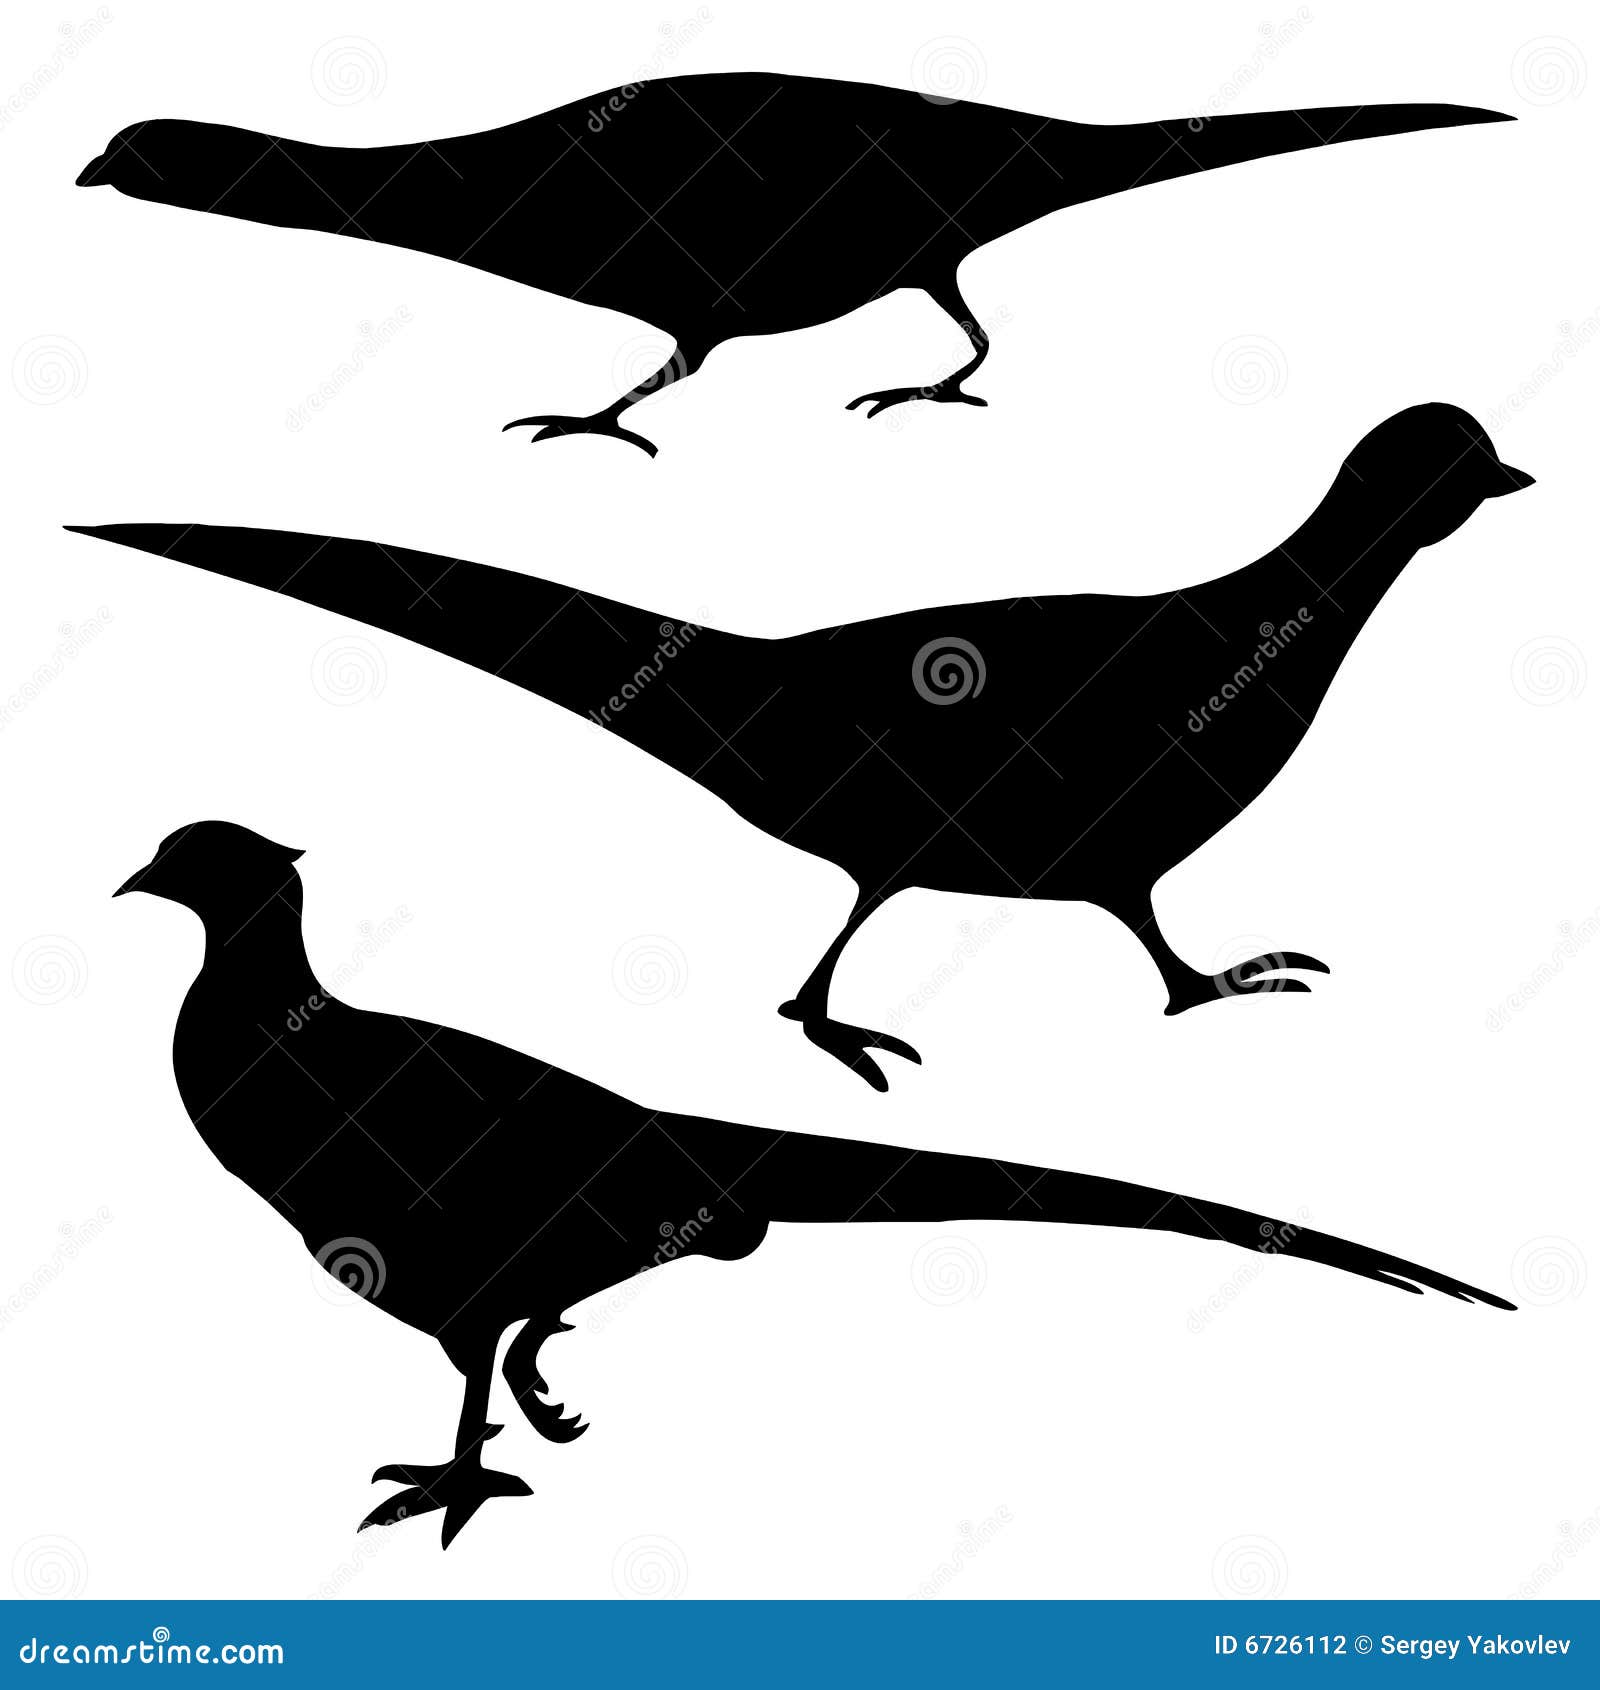 silhouette of the pheasant